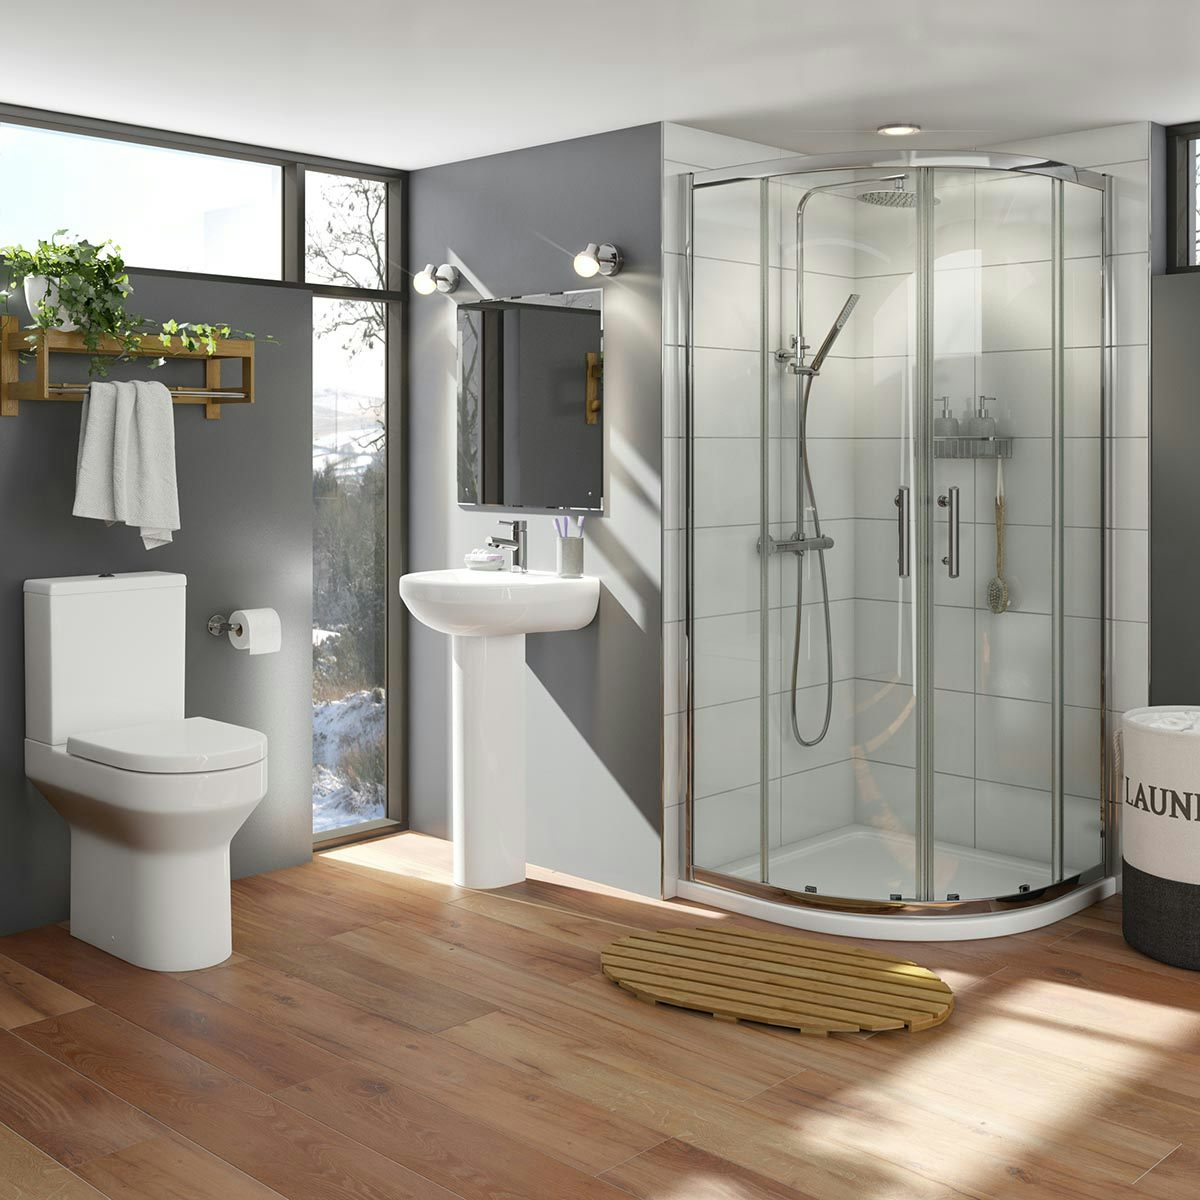 Orchard Wharfe ensuite suite with quadrant enclosure and tray 800 x 800